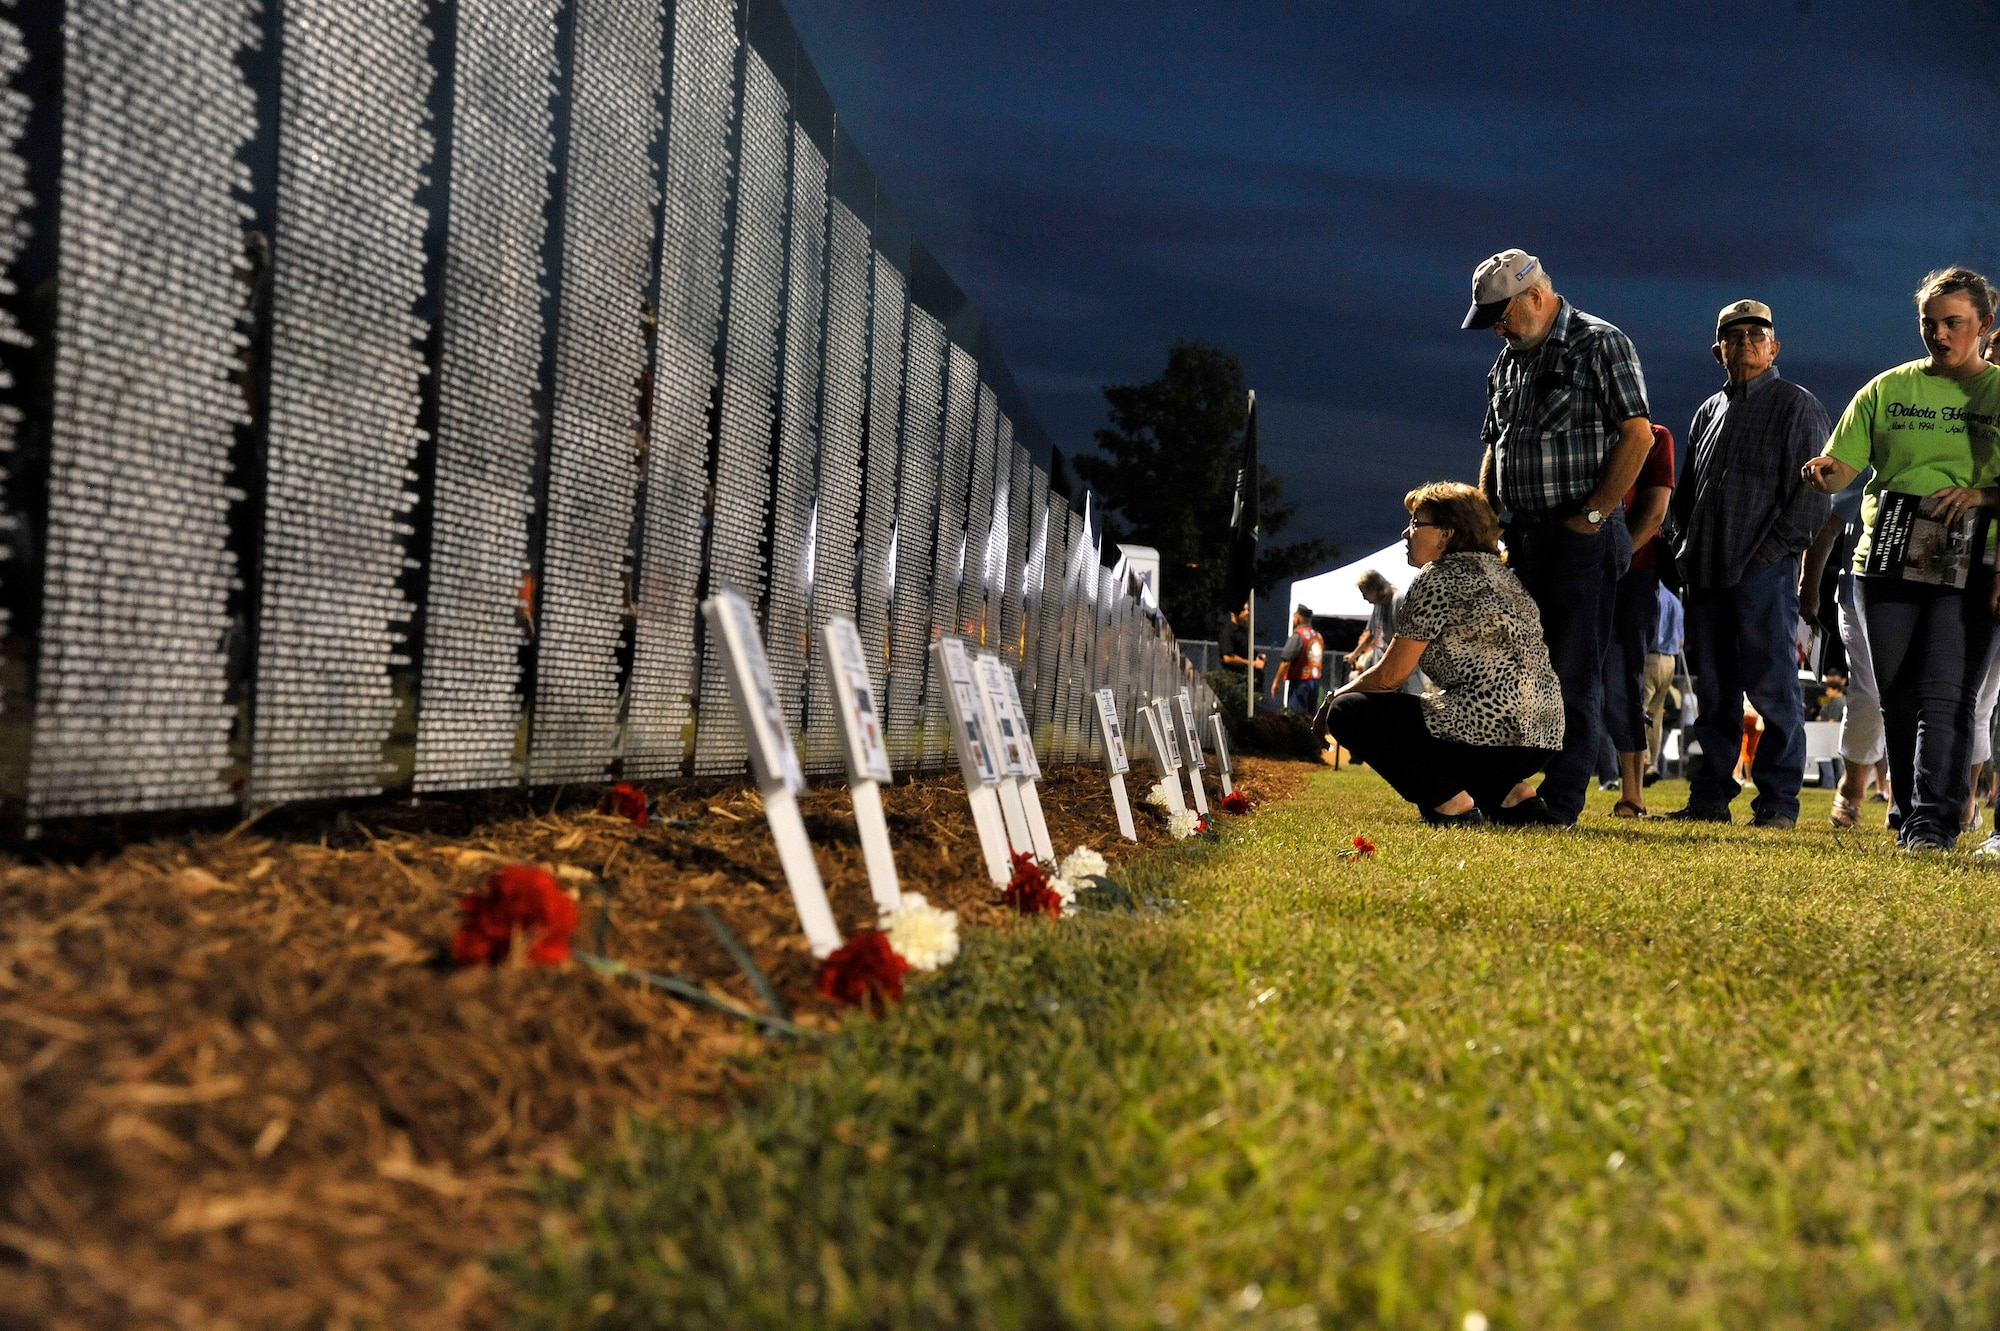 Vietnam Traveling Memorial Wall viewers pay their respects to the nearly 59,000 who lost their lives in the Vietnam War, Concordia, Mo., Sept. 5, 2013. The names etched on the wall are those who gave their lives for their country’s freedom. (U.S. Air Force photo by Airman 1st Class Keenan Berry/Released)